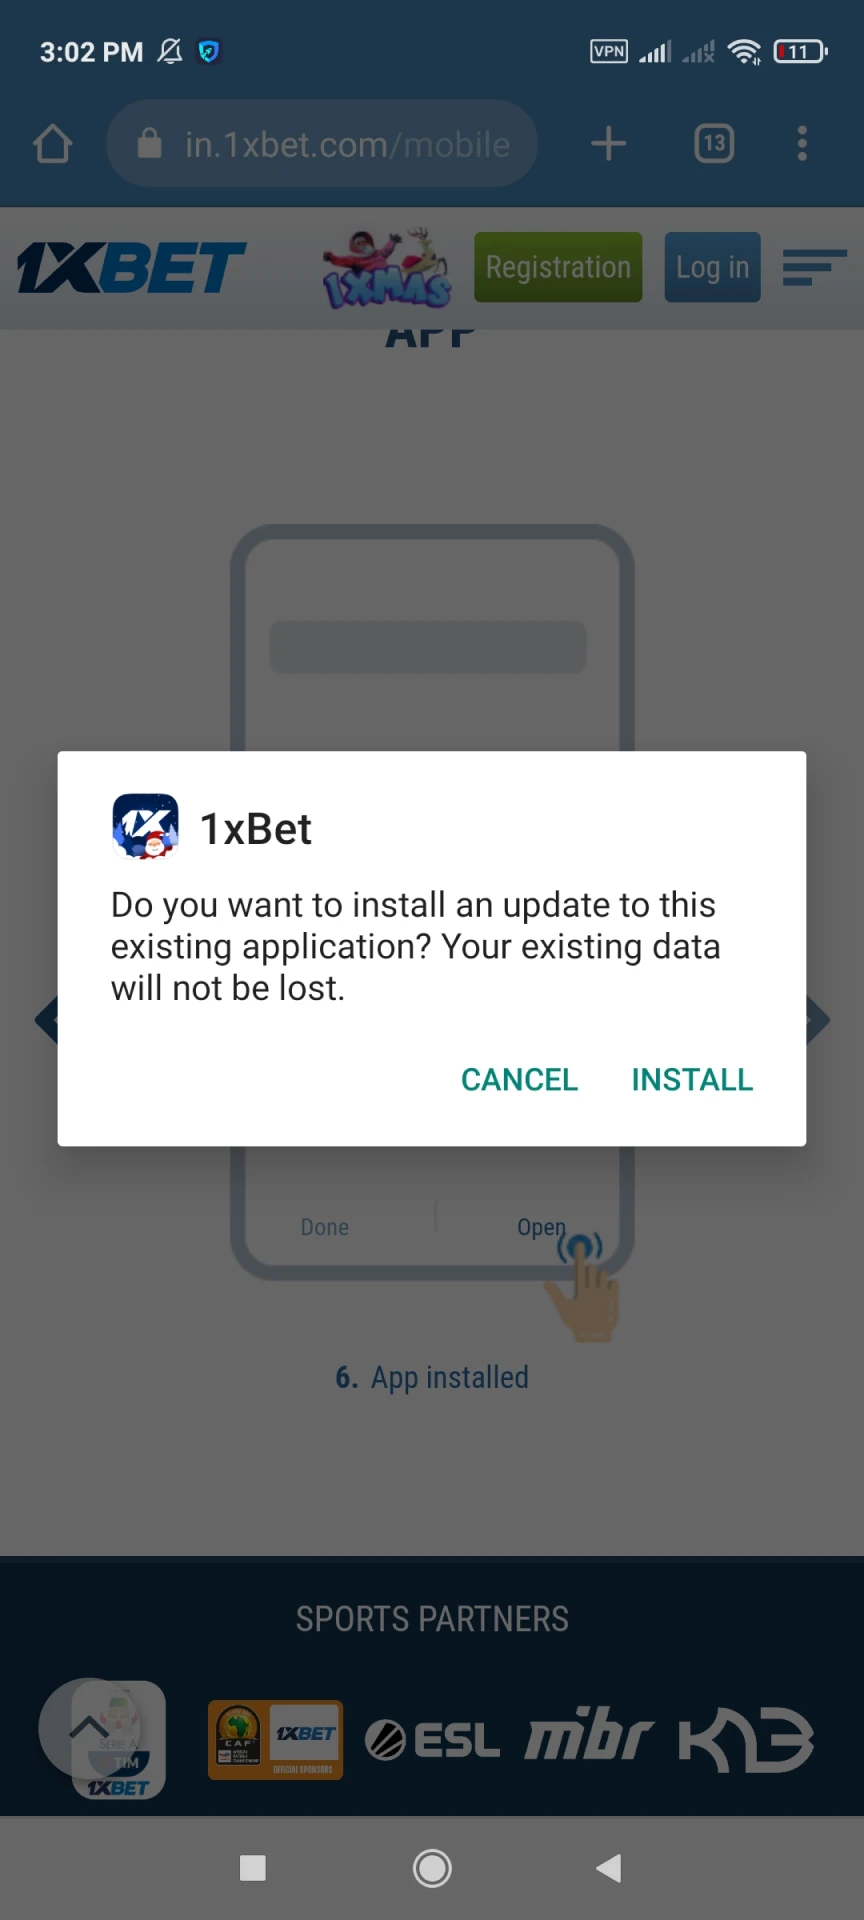 Install the 1xbet app on your smartphone.